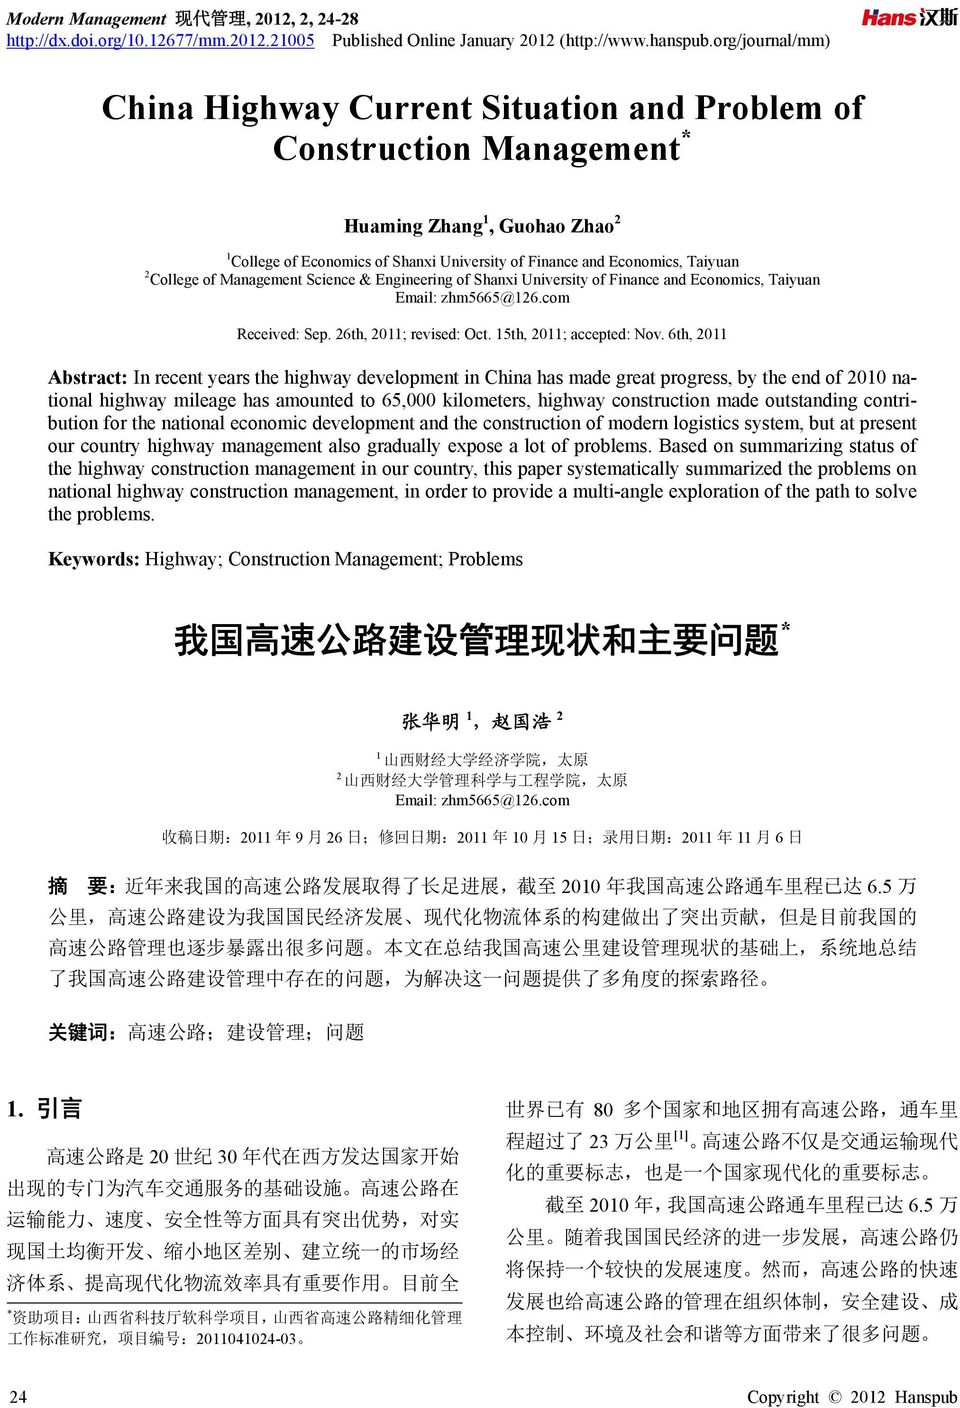 College of Management Science & Engineering of Shanxi University of Finance and Economics, Taiyuan Email: zhm5665@126.com Received: Sep. 26th, 2011; revised: Oct. 15th, 2011; accepted: Nov.